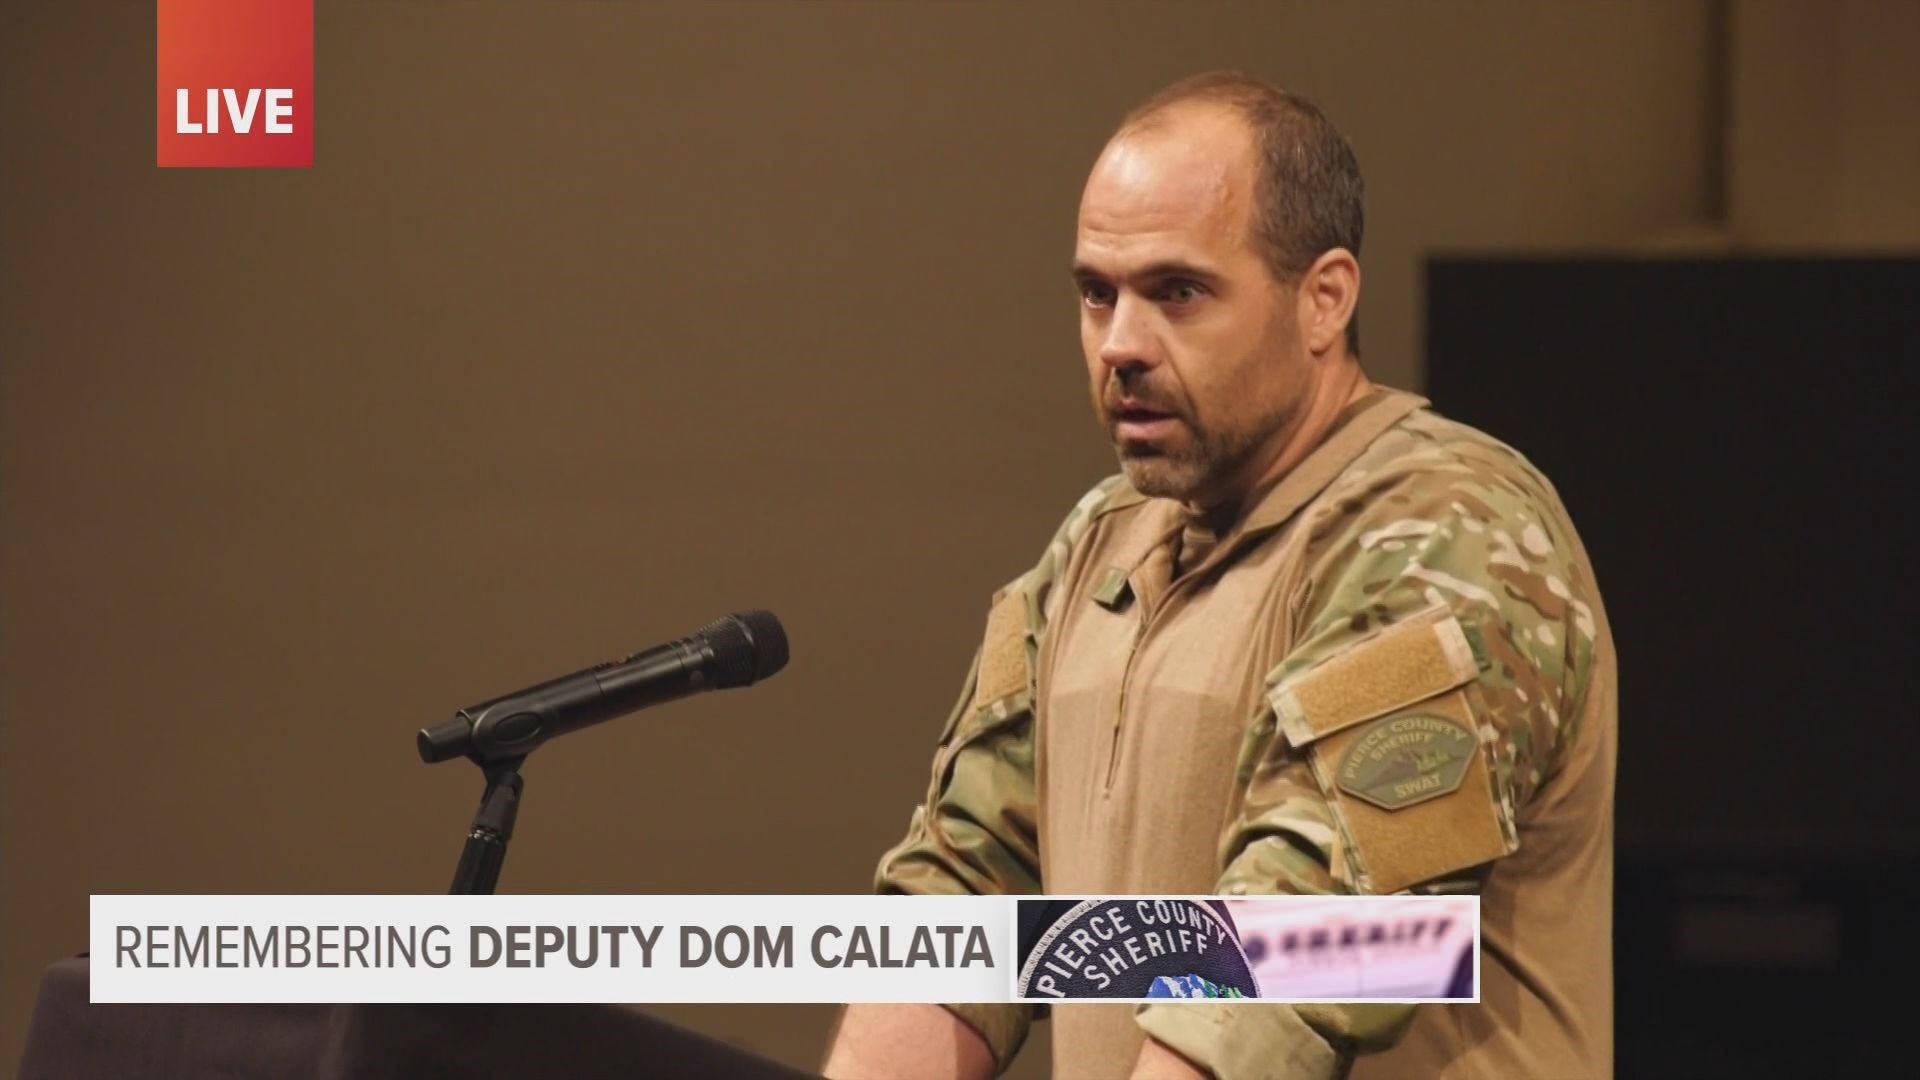 Sgt. Rich Scaniffe, who leads the Pierce County Sheriff's Department SWAT team, speaks at fallen Deputy Dom Calata's celebration of life service.